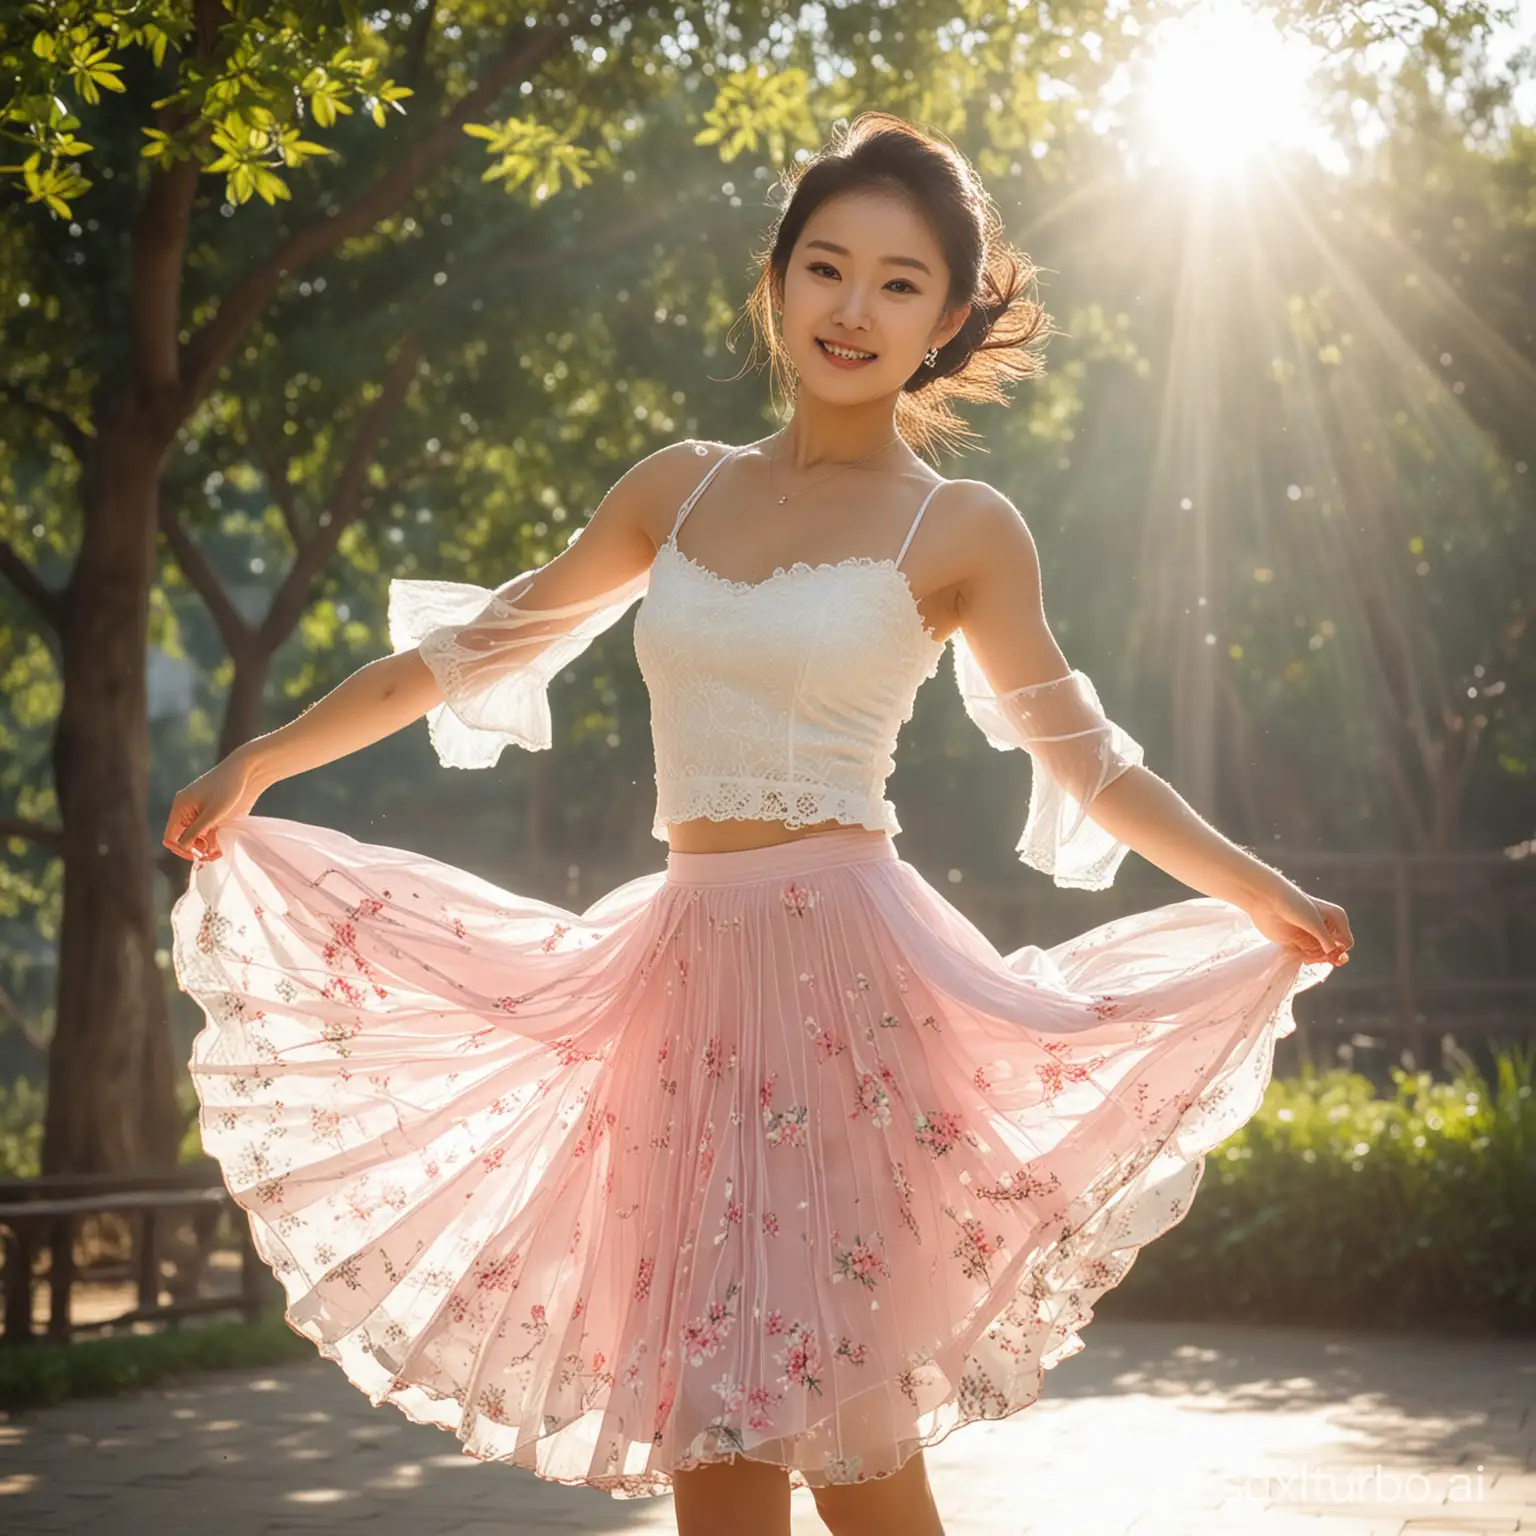 Graceful-Chinese-Girl-Dancing-Outdoors-in-Sunlight